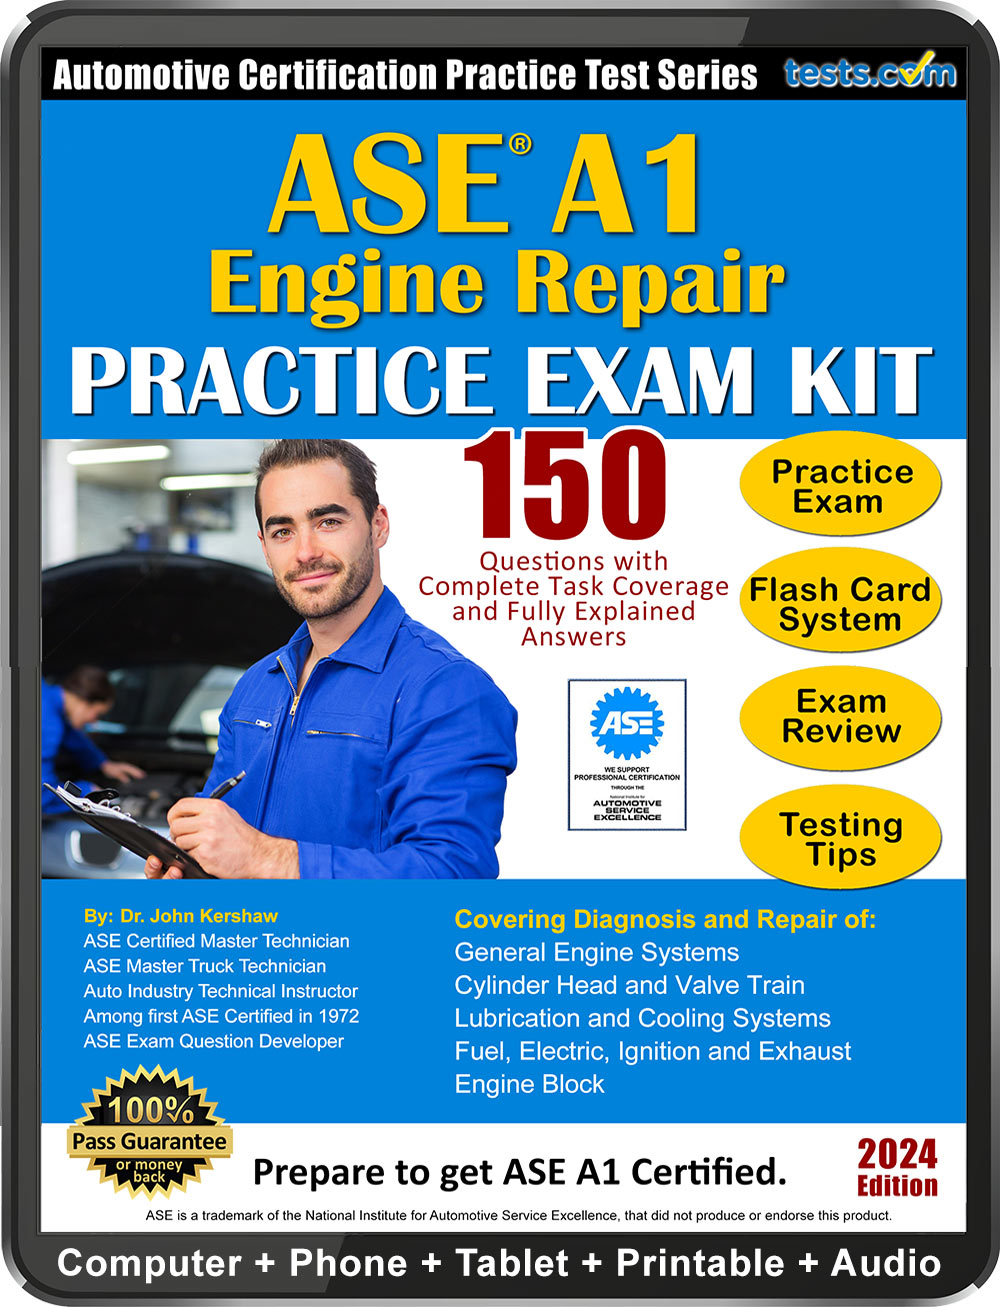 ASE Diesel Engines test T2 practice test 1 with Answers., Exams Nursing